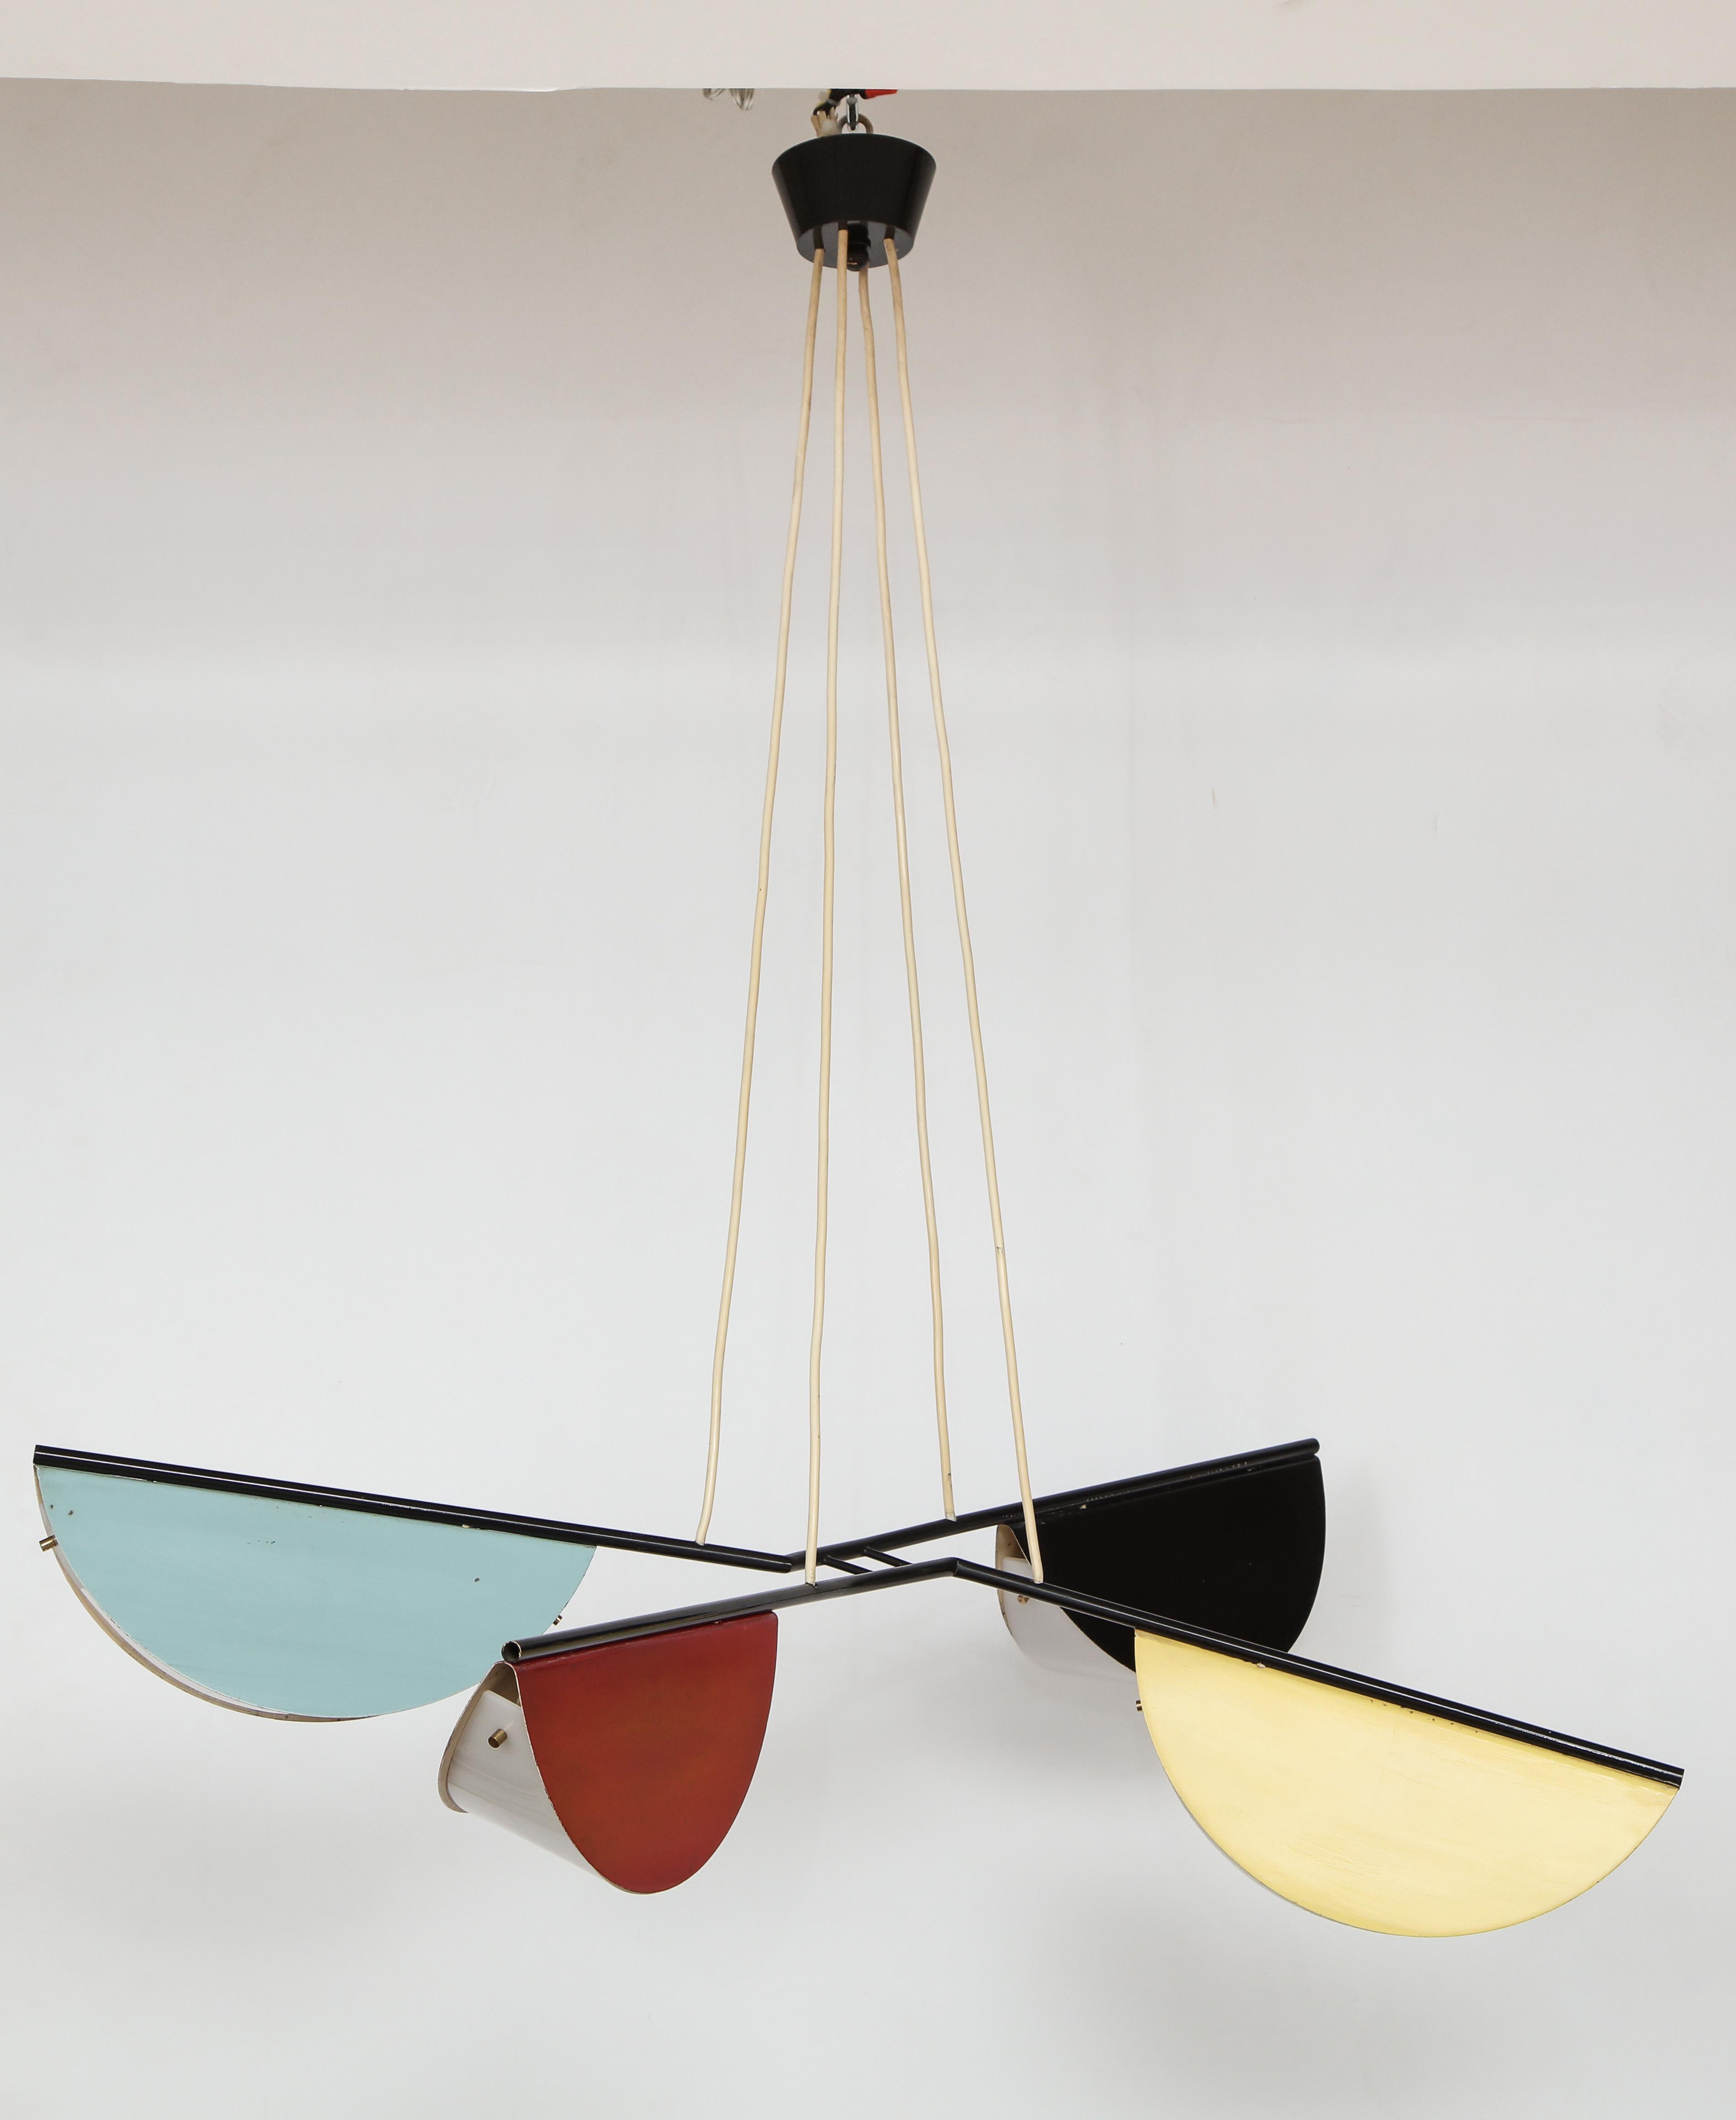 French Midcentury Suspension Four Arm Light 'Chandelier', France, circa 1950